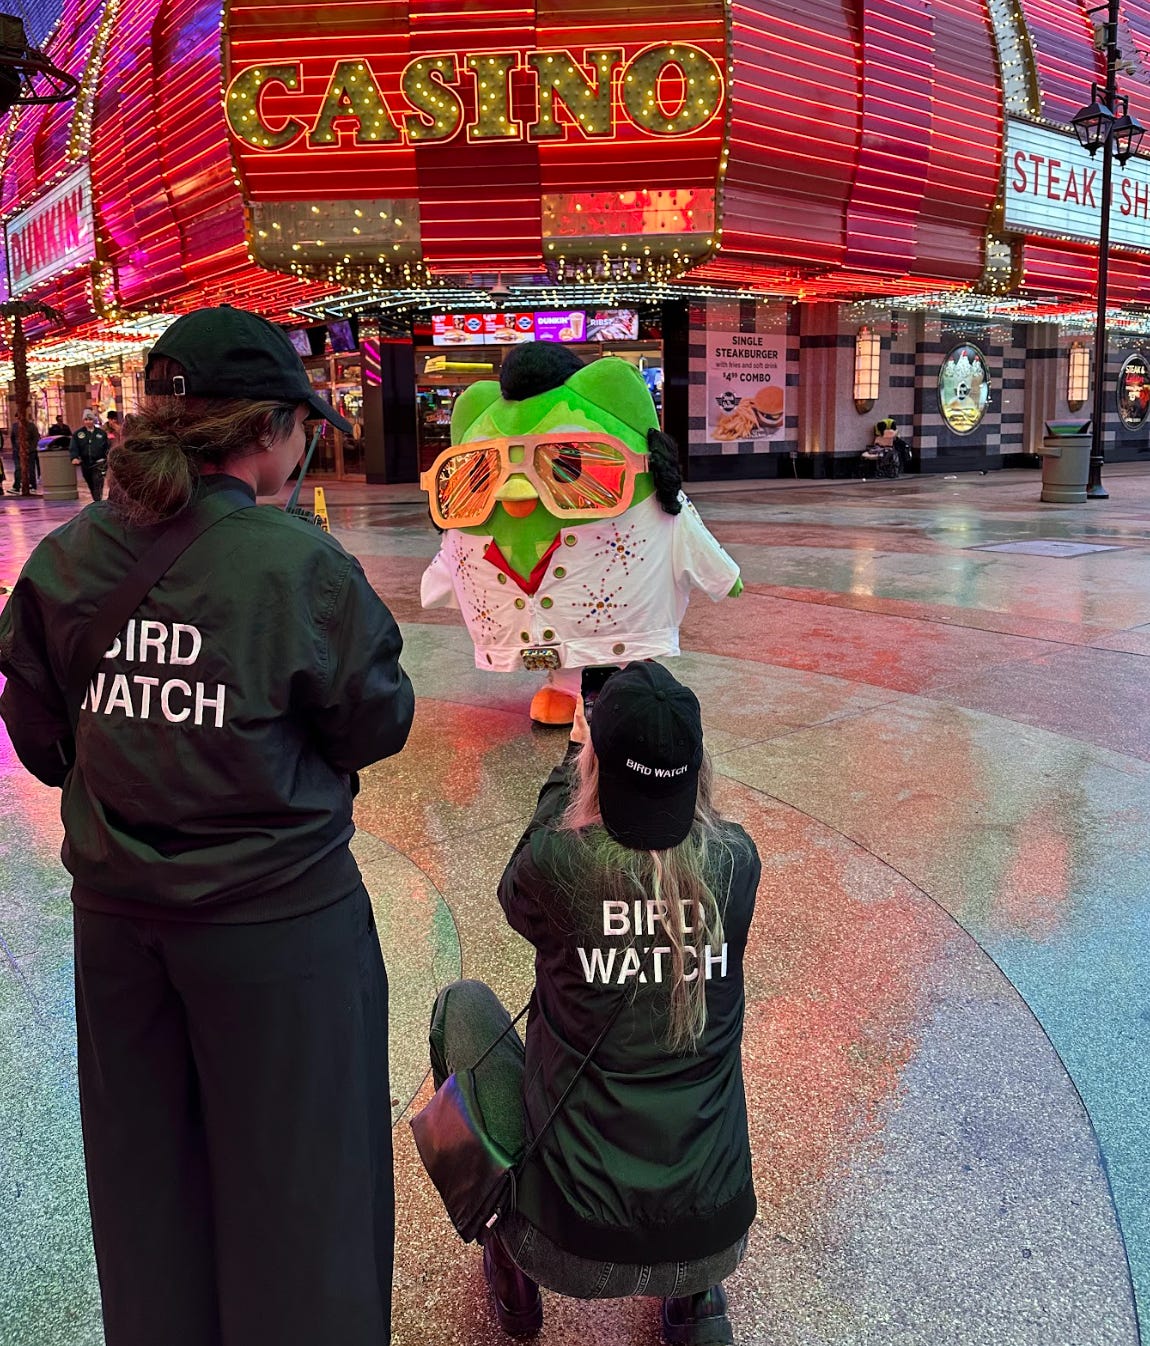 Duolingo owl dressed as elvis in Las Vegas with team members capturing content wearing shirts that say "BIRD WATCH"